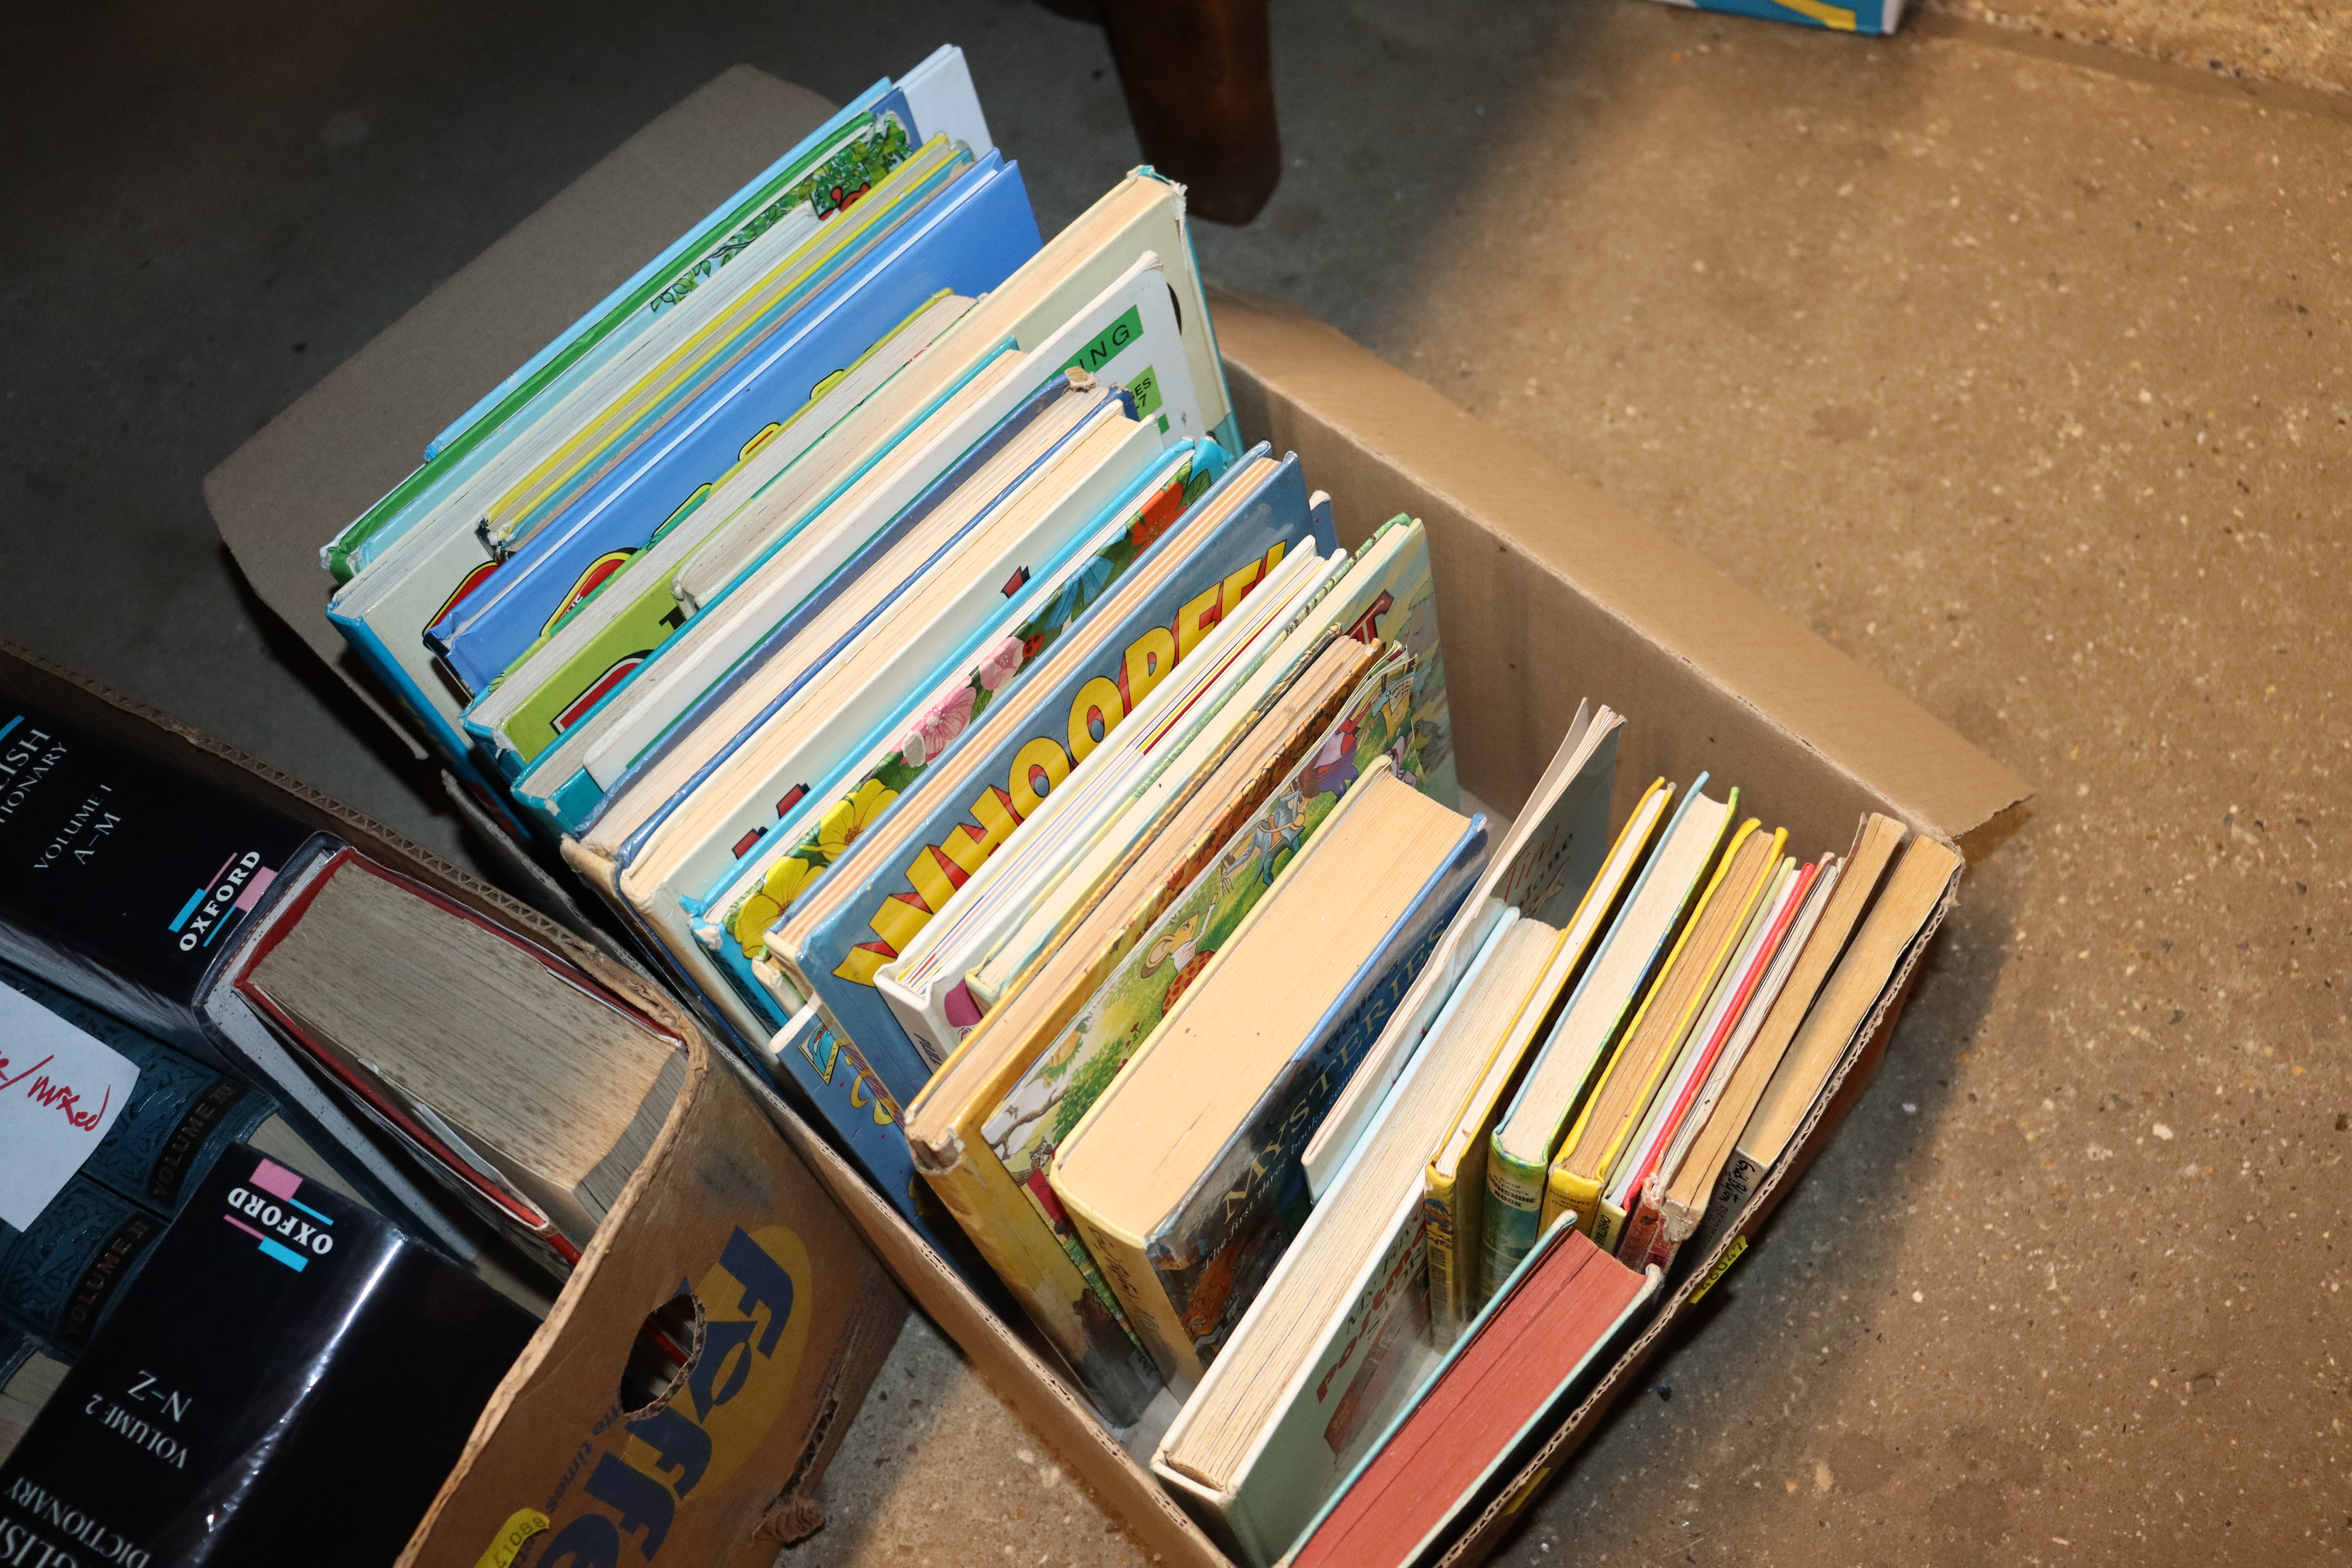 A box of miscellaneous children's books and annual